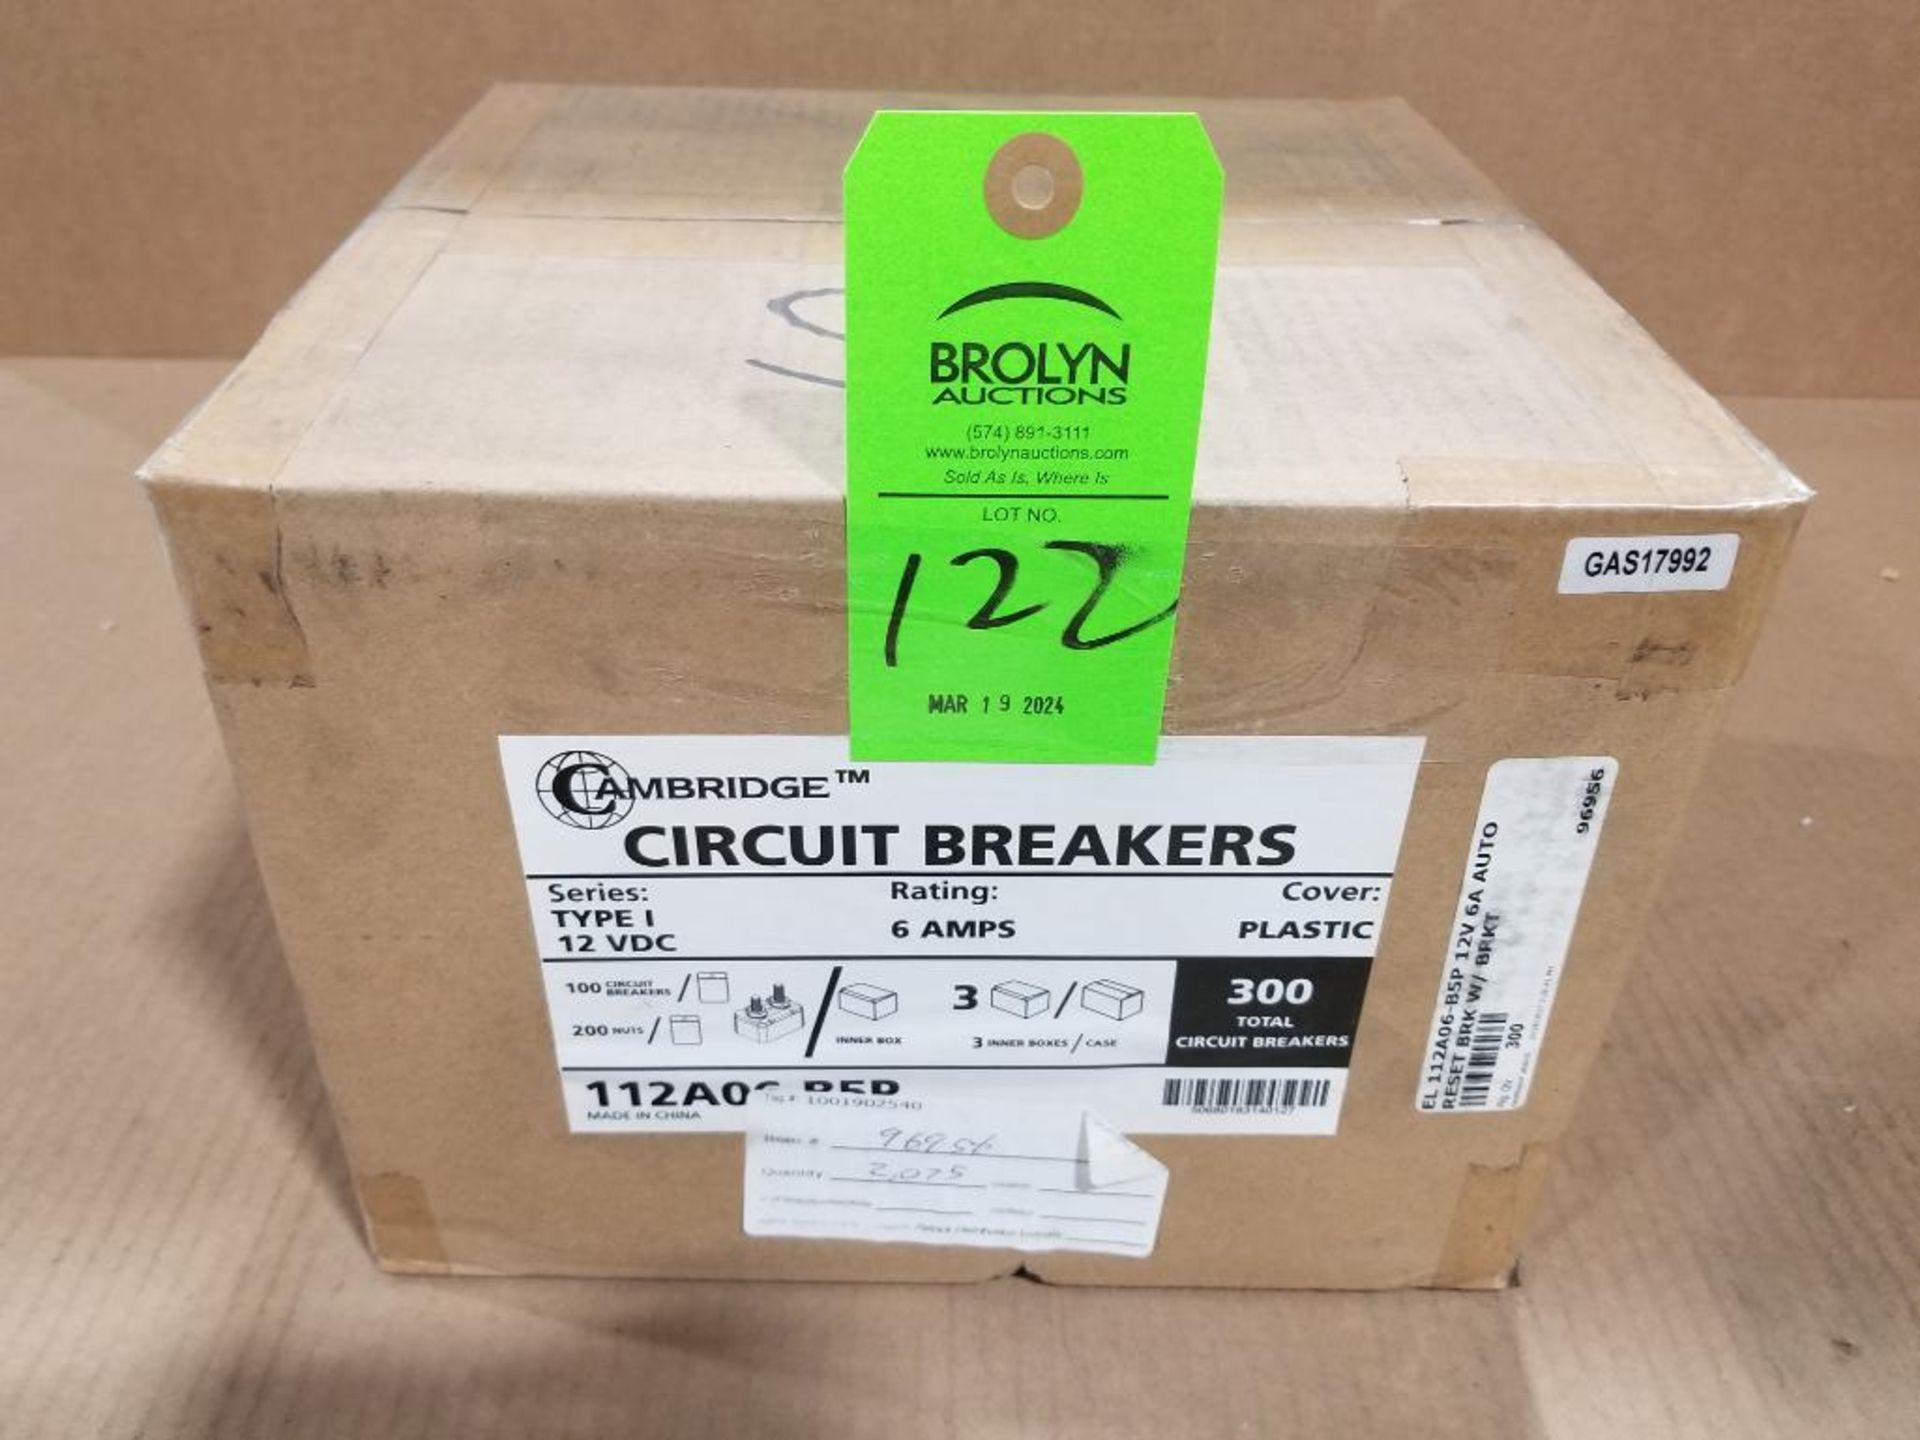 Qty 300 - Cambridge circuit breakers. Part number 112A06-B5P.